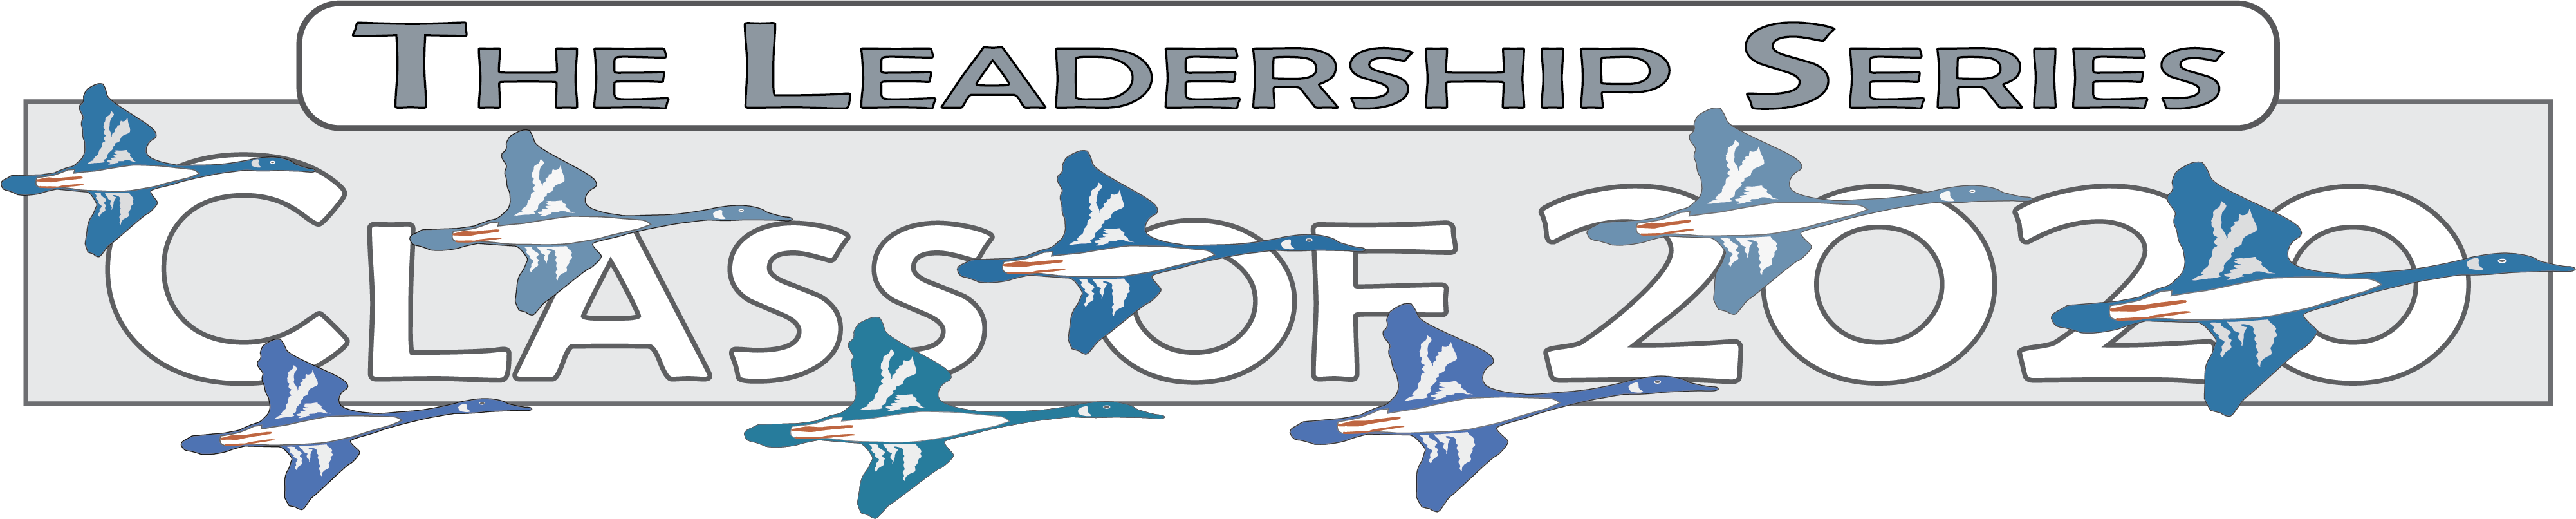 lEADERDERSHIP cLASS OF 2020 web banner with the words "class of 2020
" and drawing of geese flying in "V" formation